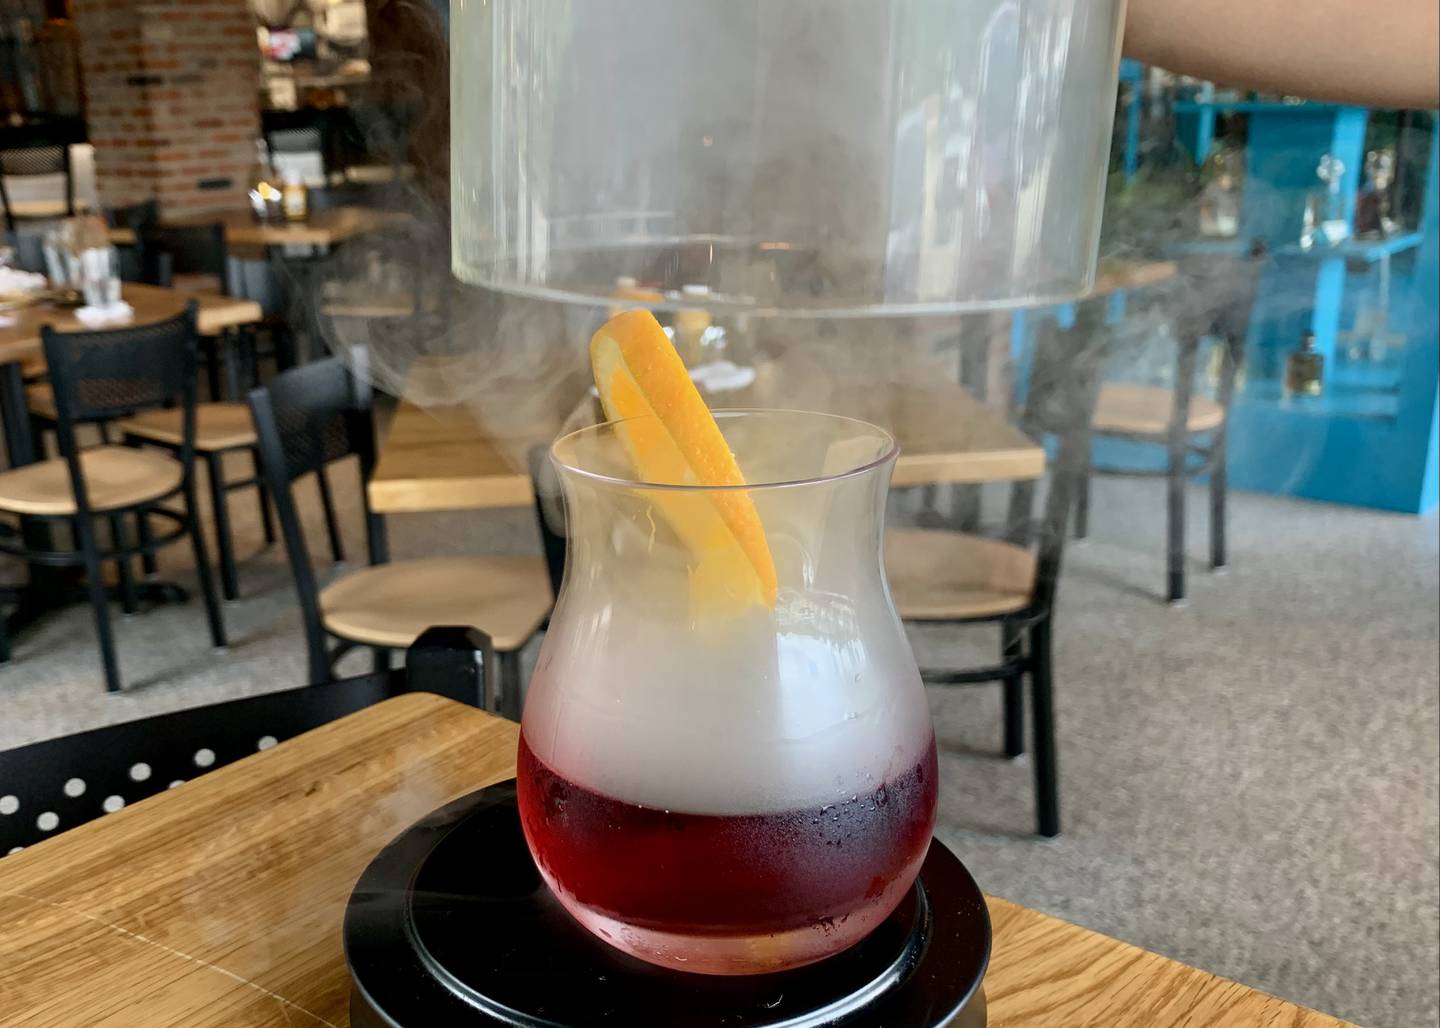 The Smoke on the Fox is a smoky version of the Manhattan, replacing the bitters with Licor 43, giving the cocktail a sweet finish.  One of many cocktails at Dakotas.